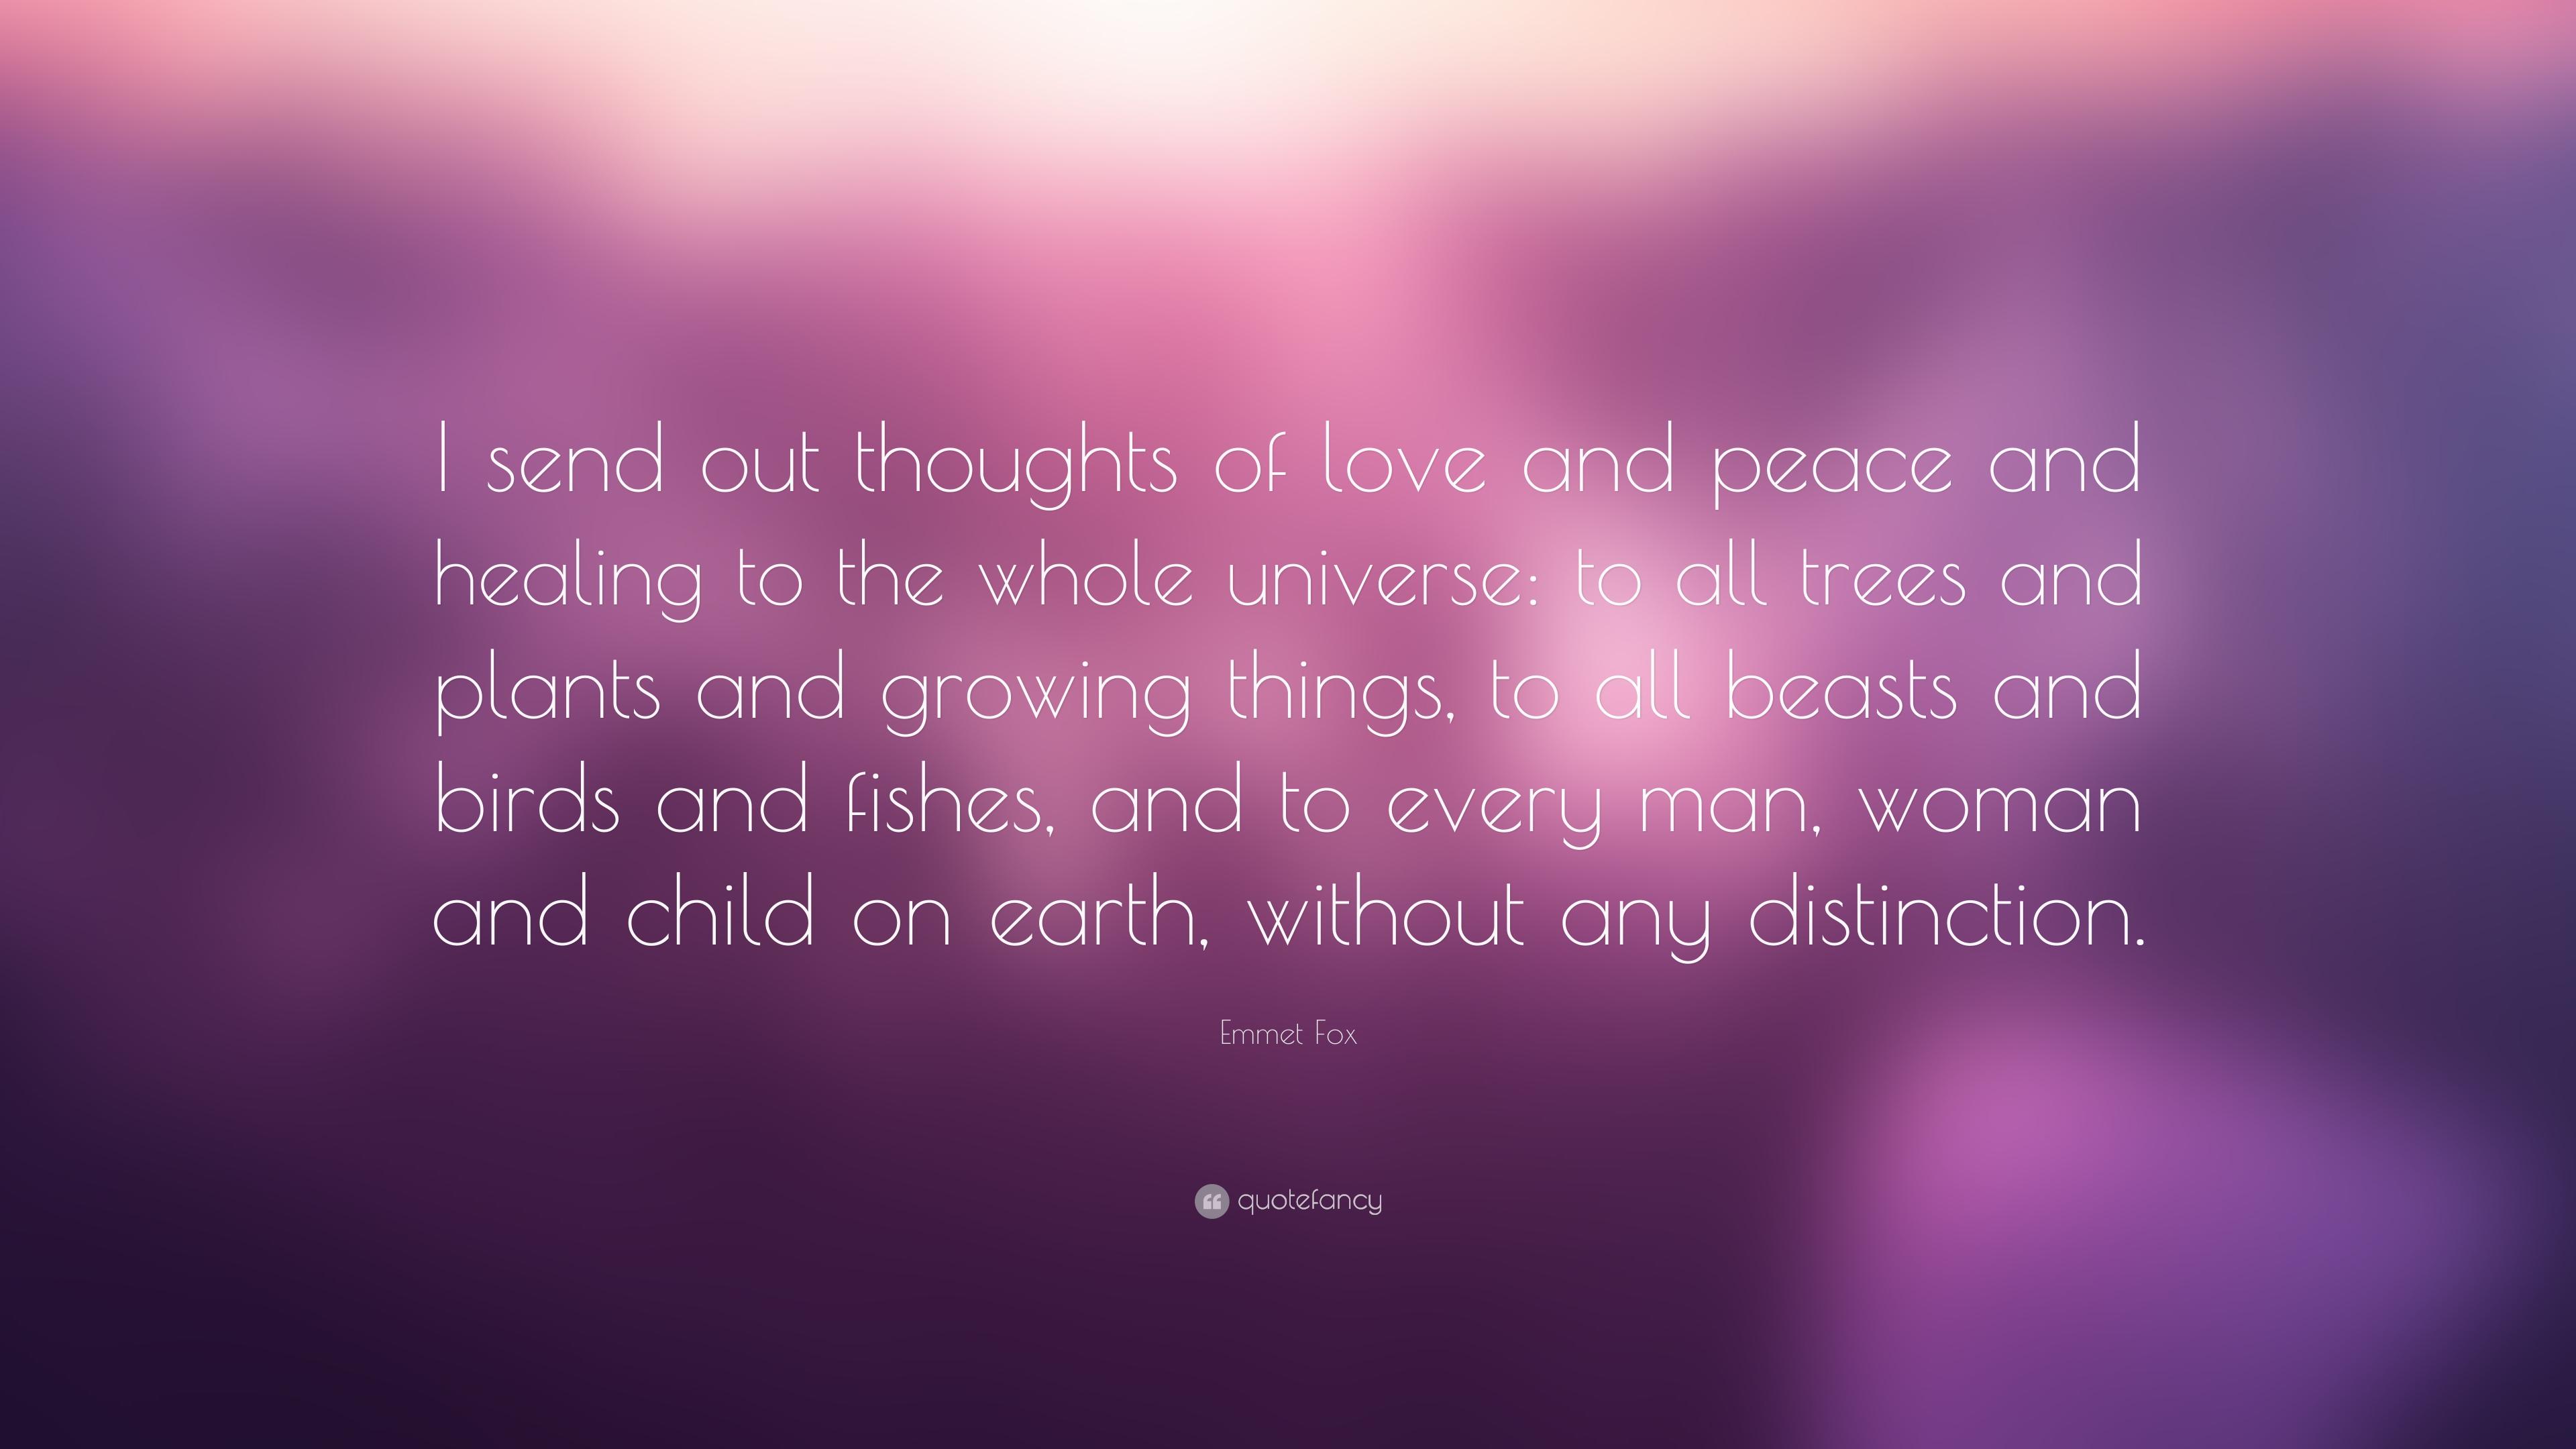 Emmet Fox Quote: “I send out thoughts of love and peace